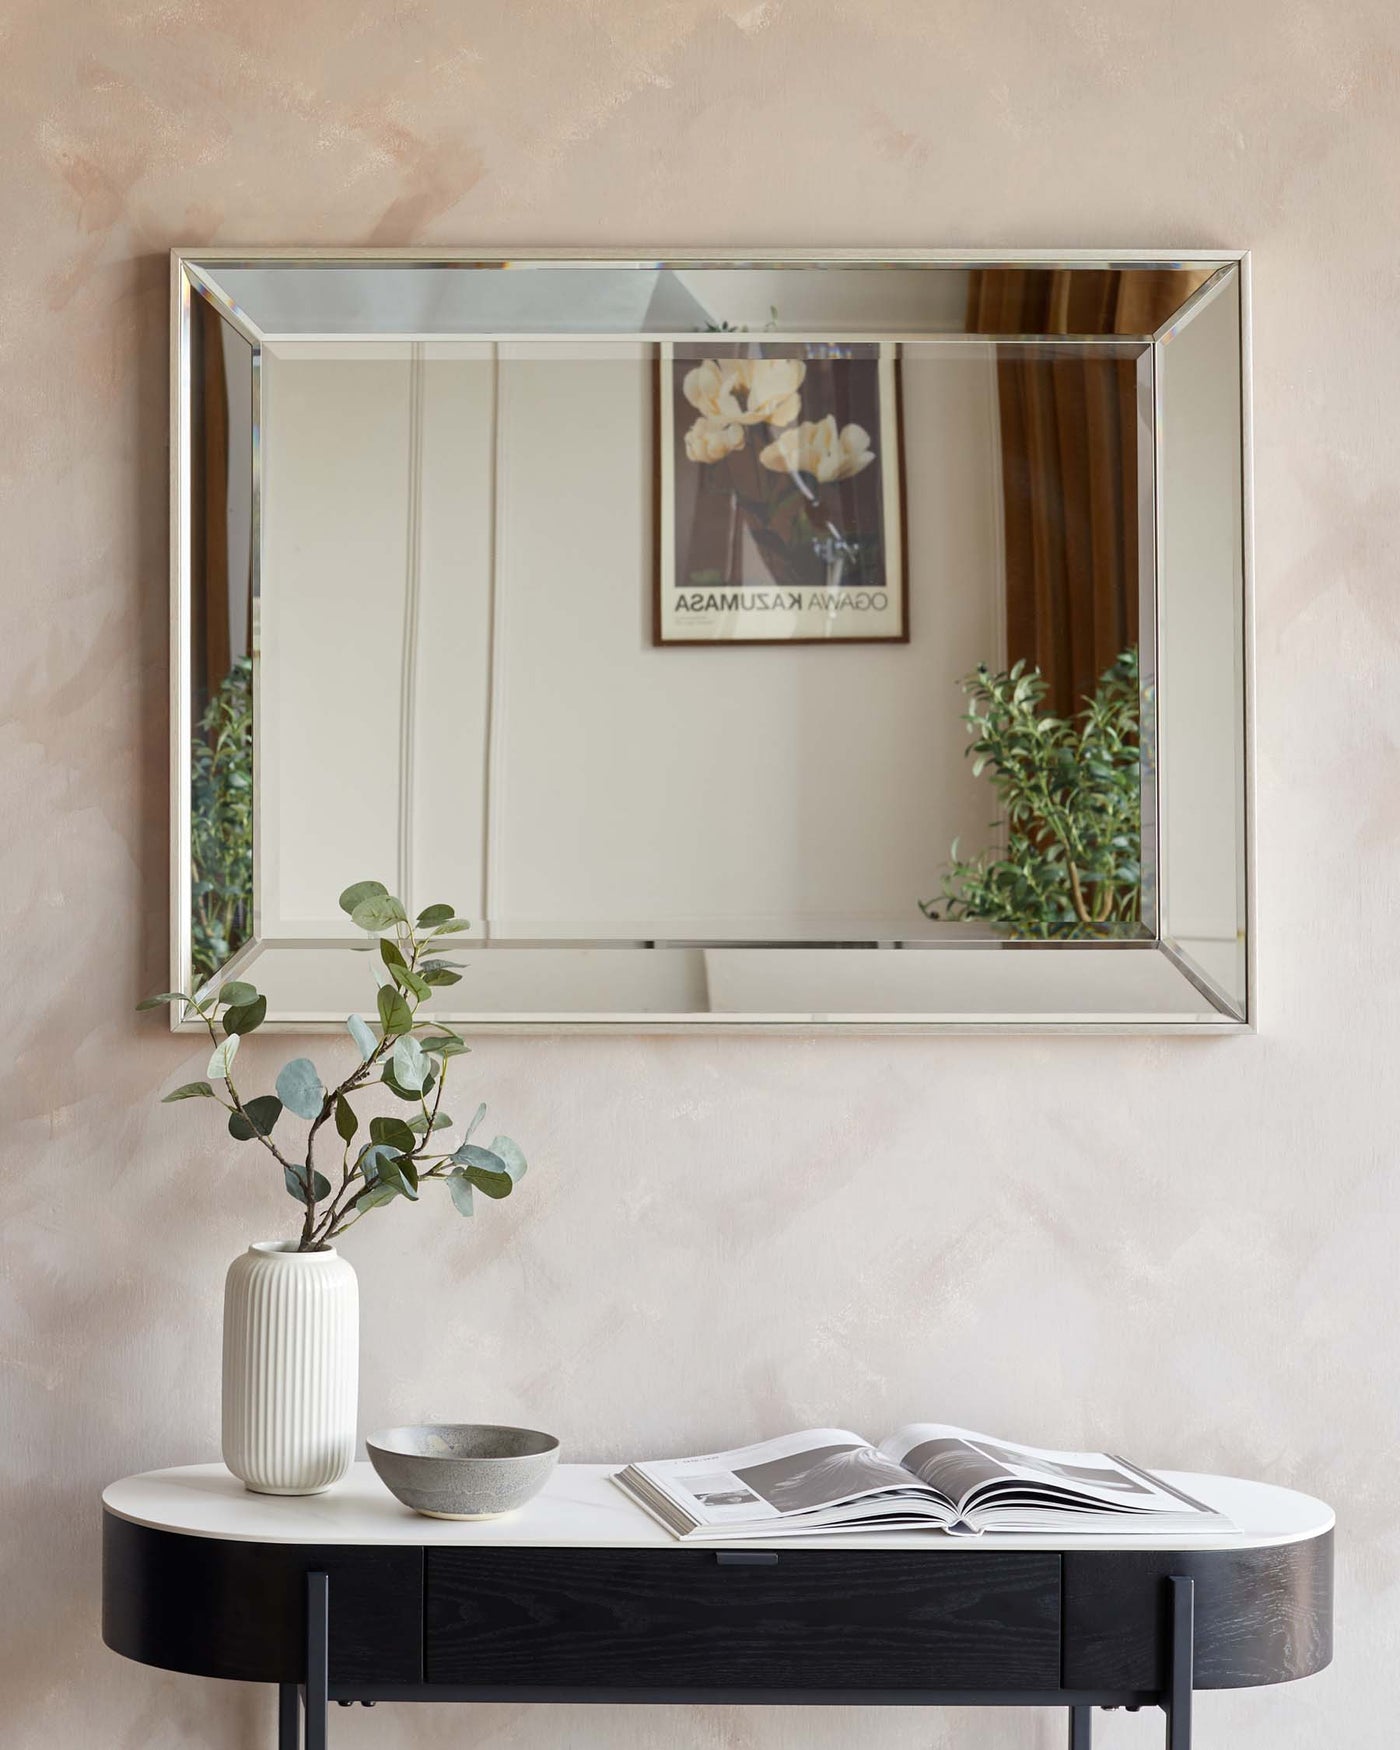 An elegant demilune console table with a black finish and sleek design, accompanied by a large rectangular wall mirror with a minimalist golden frame. Decor includes a textured white vase with greenery, a metallic bowl, and an open magazine.